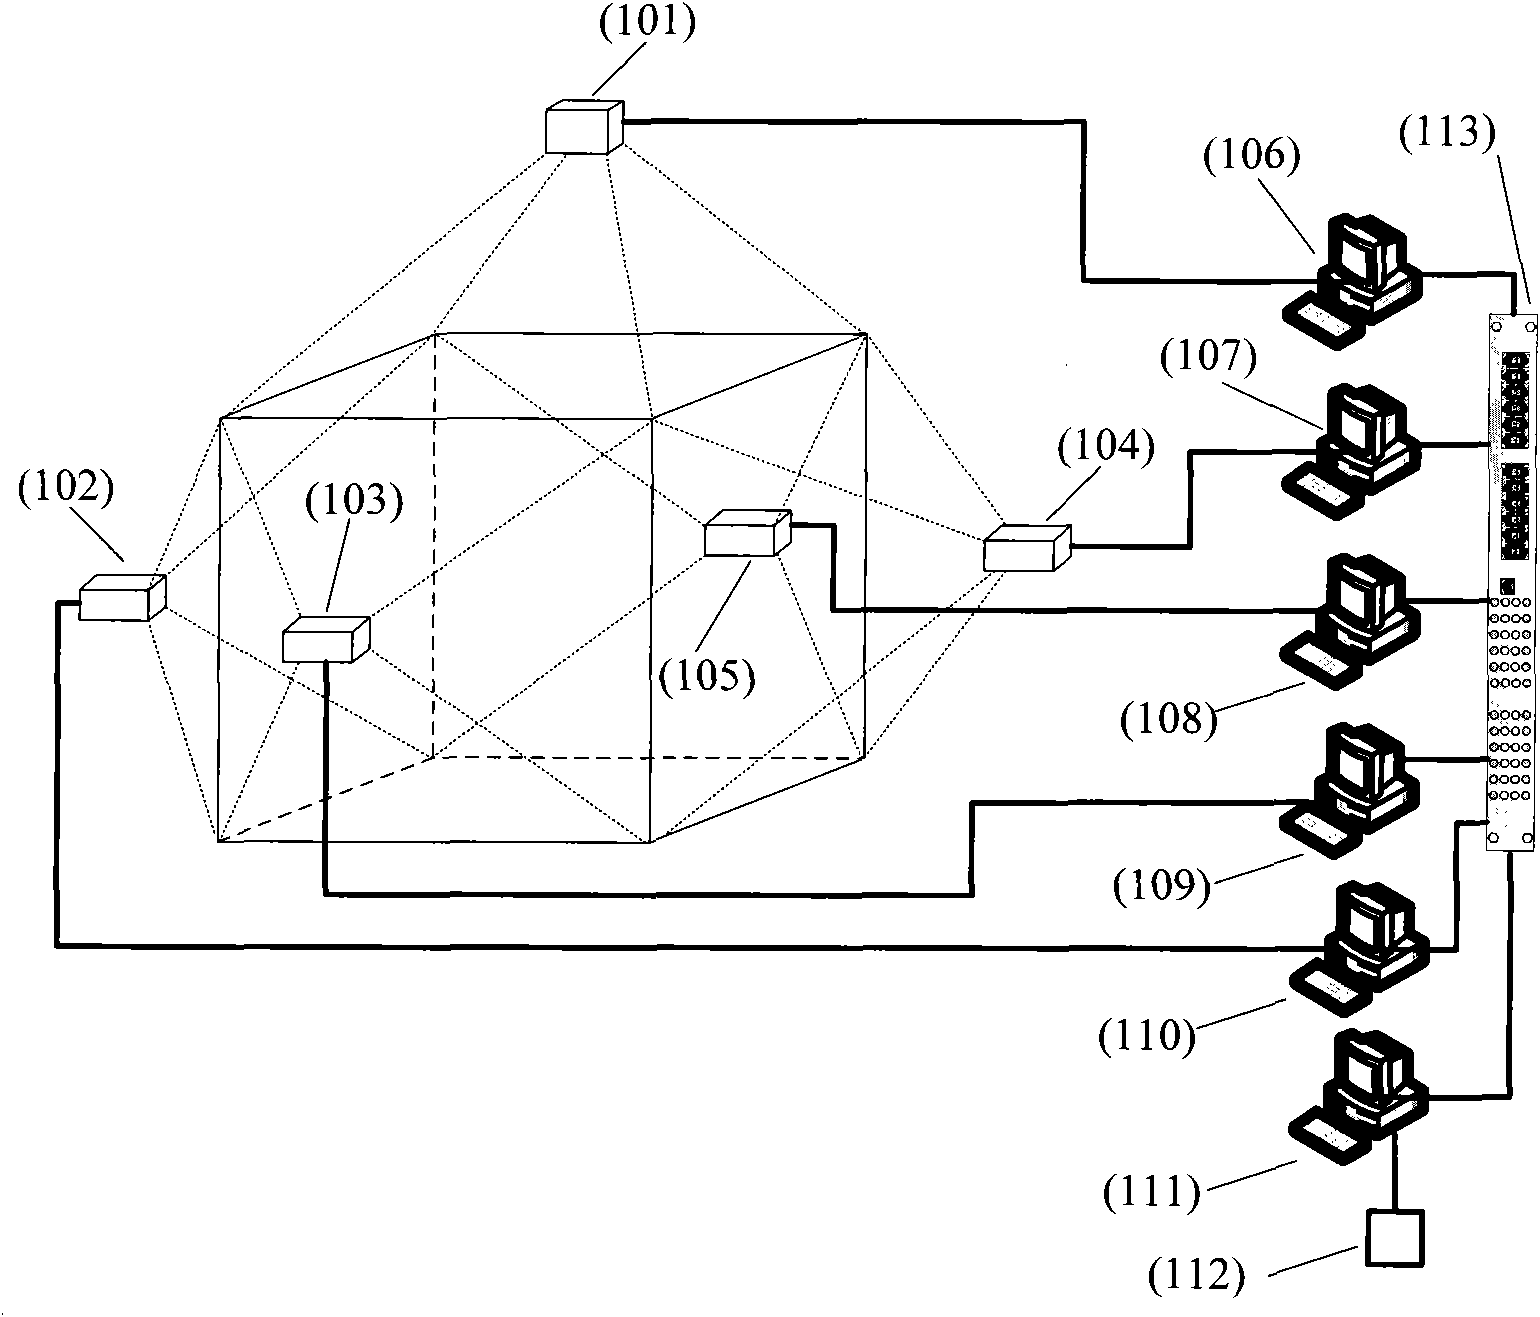 Method for interactively playing panoramic video stream on CAVE projection system